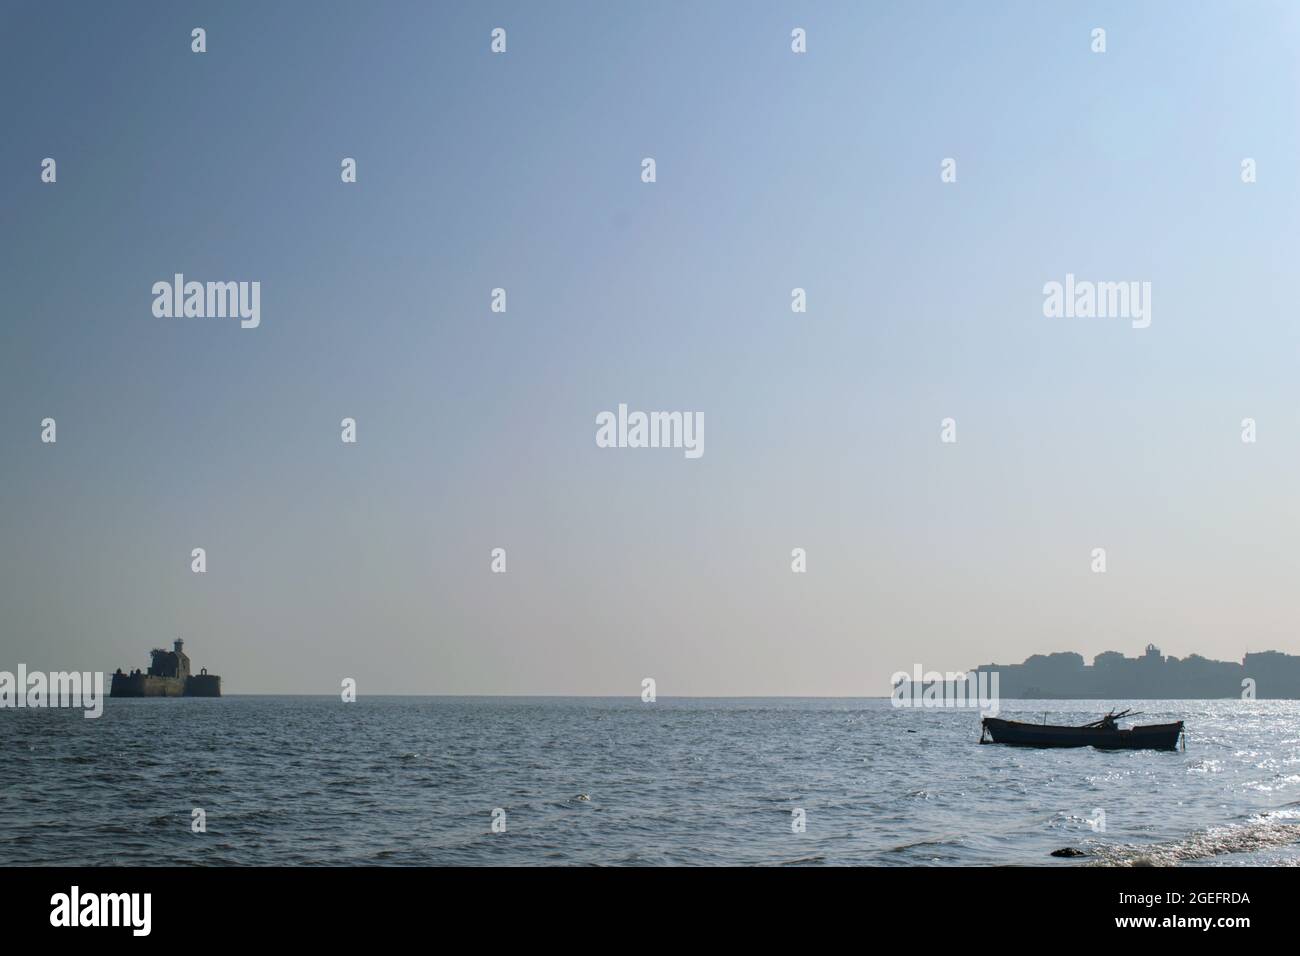 Silhouette of the boat, the Lighthouse and the City are visible on the bright sunny day, Diu, India. View of the Arabian sea on a bright summer day. Stock Photo